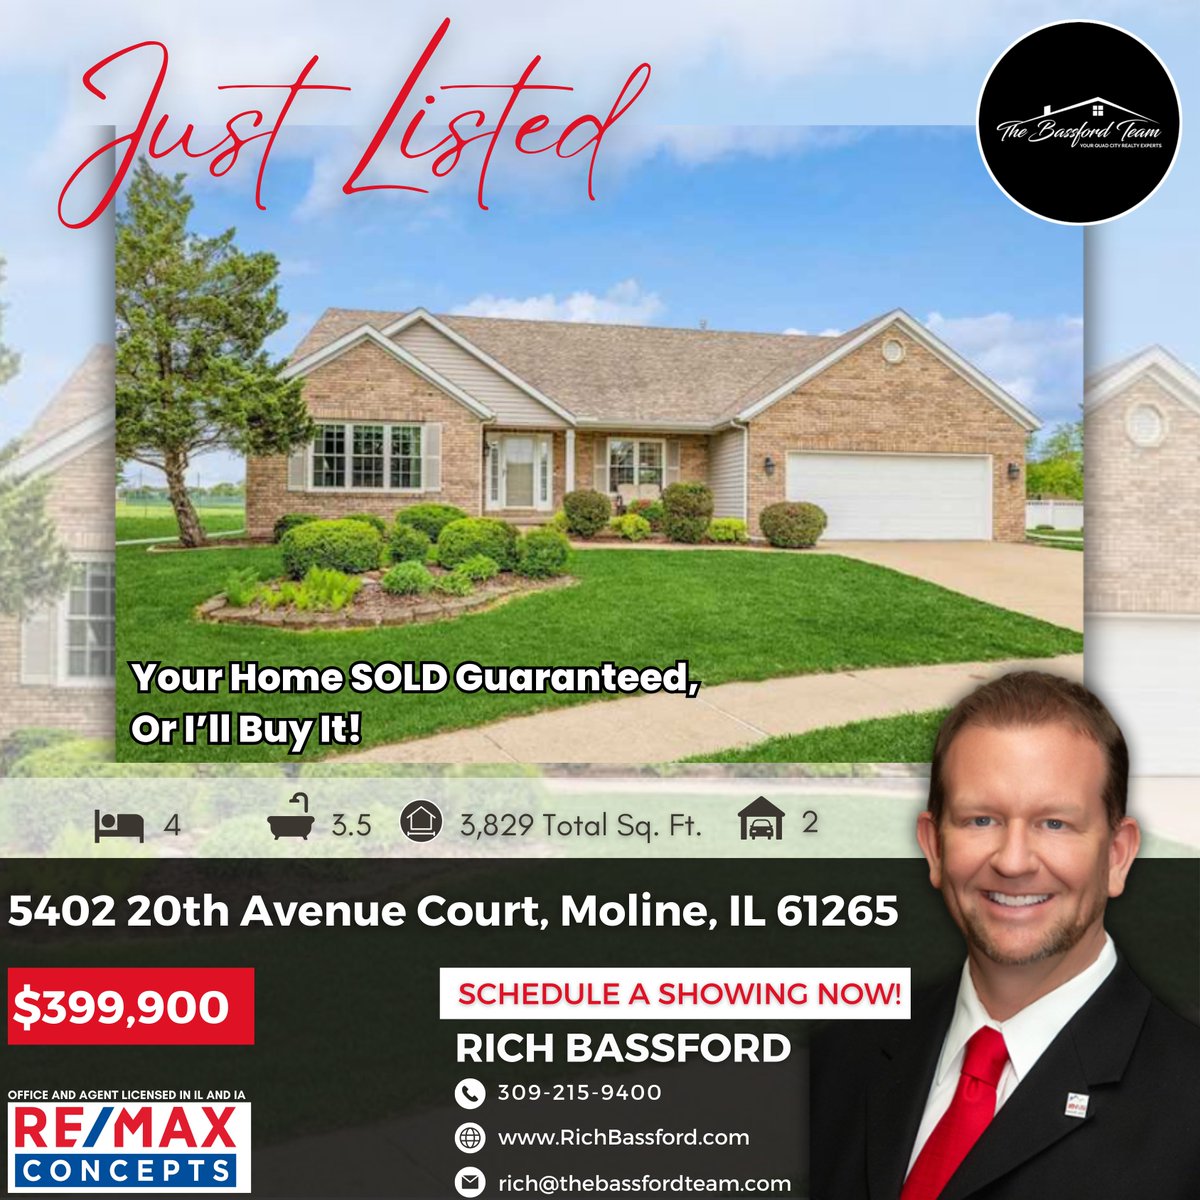 🏡 Discover your dream home in Moline!
..
🔗👉🏻👉🏻👉🏻 richbassford.com/property-searc…
..
#quadcitiesillinois #visitquadcities #quadcitiesrealtor #quadcitiesrealestate #quadcitieshomesforsale #qcproperties #singlefamilyhomes #molinehomesforsale #remaxconcepts #thebassfordteam #richbassford